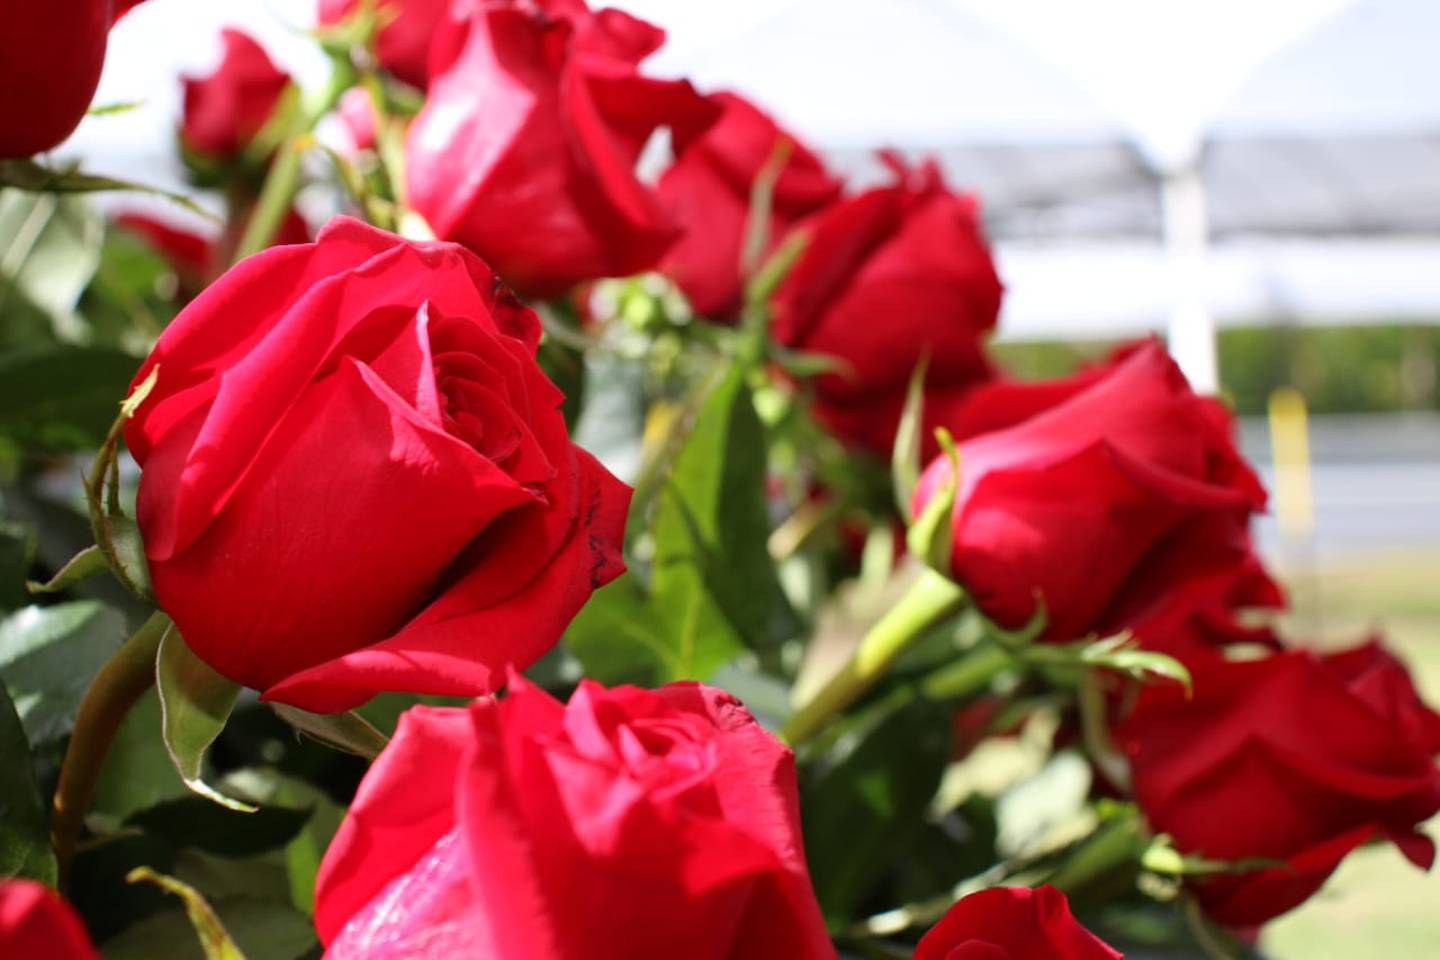 Flowers make up Ecuador's fourth-largest export product.